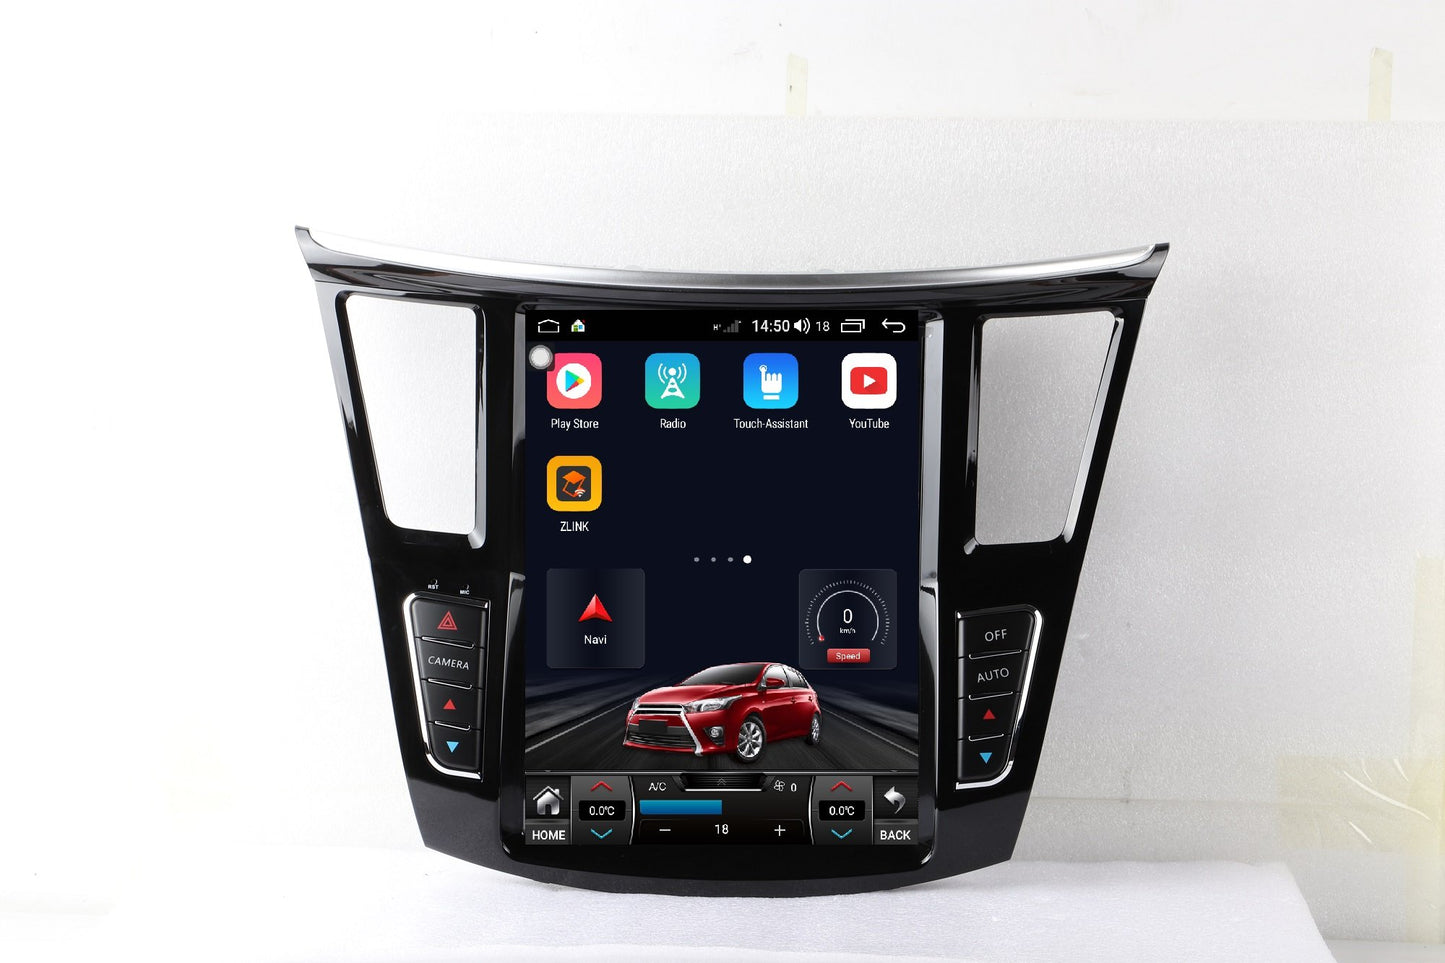 [Open box] 12.1"  Octa-Core Android 10.0 Navigation Radio for Infiniti JX35 QX60 2014 - 2019 - Smart Car Stereo Radio Navigation | In-Dash audio/video players online - Phoenix Automotive